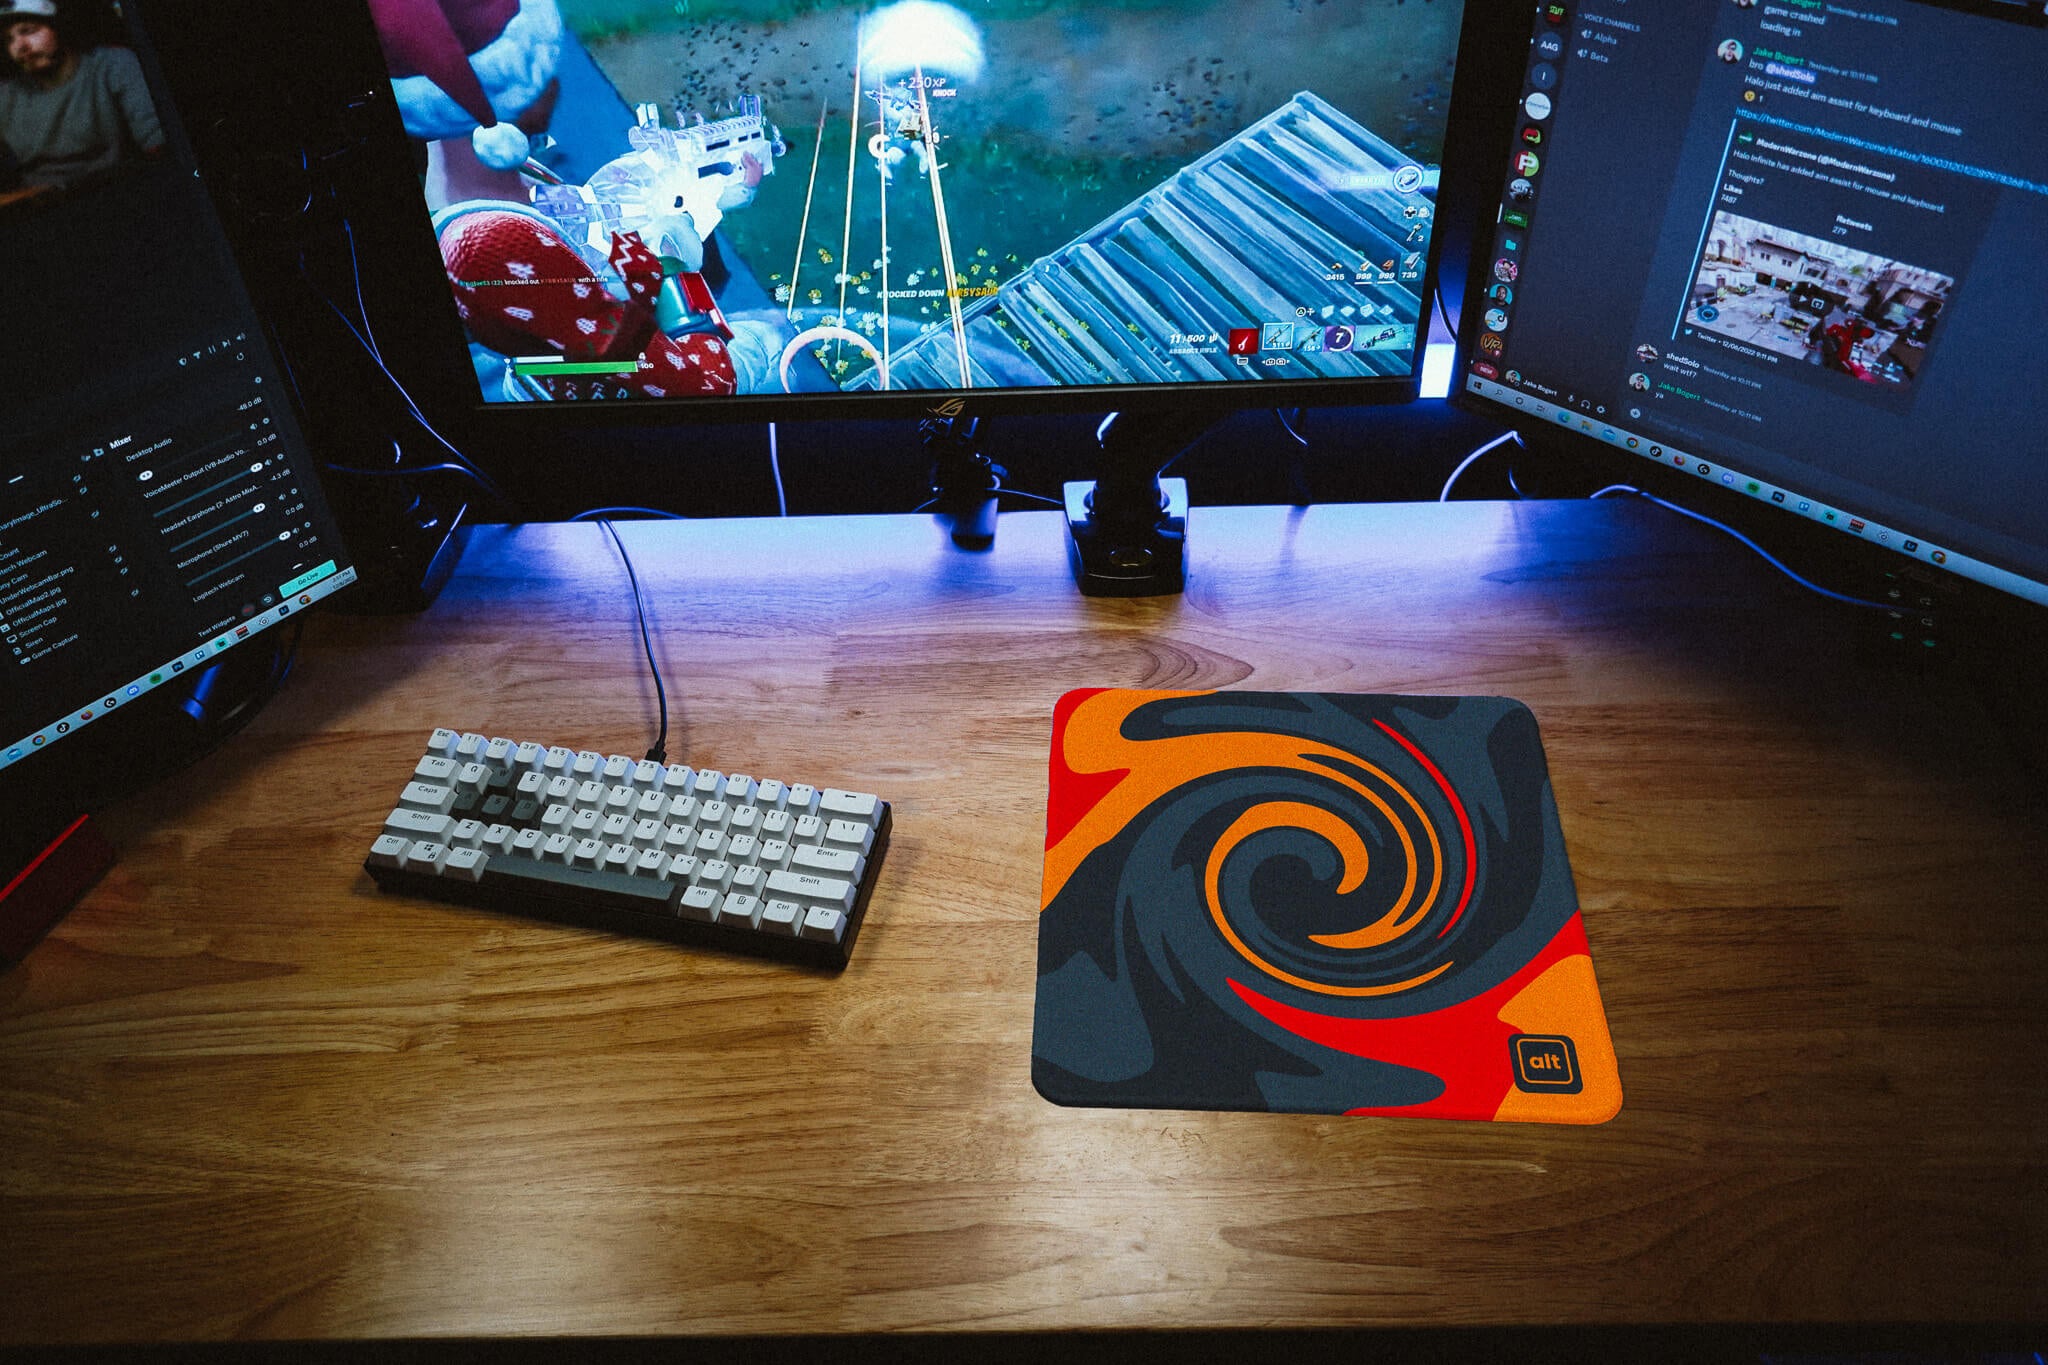 Twisted Rover Mousepad